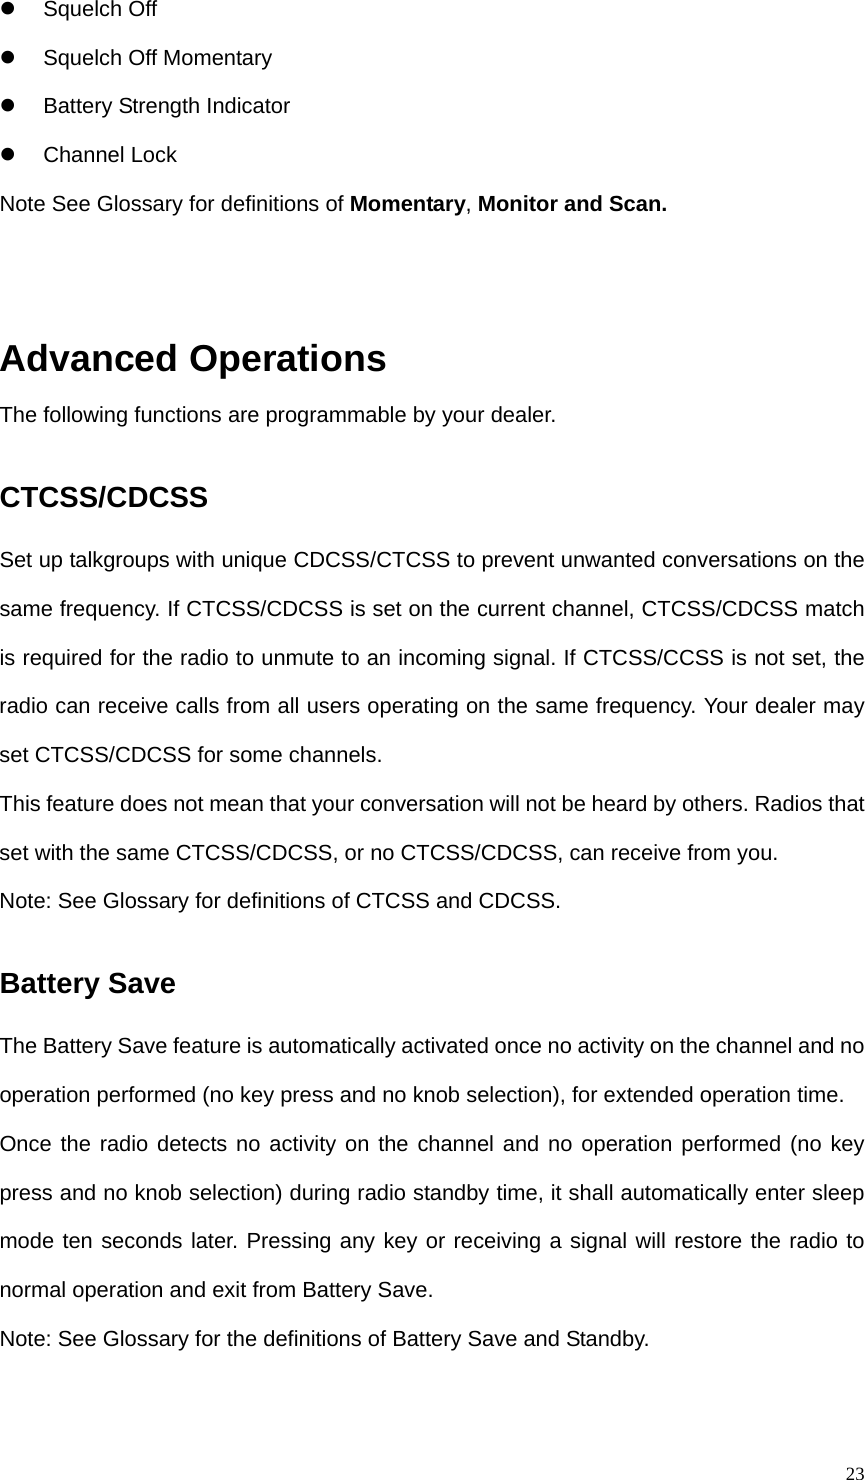   23 Squelch Off  Squelch Off Momentary    Battery Strength Indicator  Channel Lock Note See Glossary for definitions of Momentary, Monitor and Scan.     Advanced Operations The following functions are programmable by your dealer.   CTCSS/CDCSS Set up talkgroups with unique CDCSS/CTCSS to prevent unwanted conversations on the same frequency. If CTCSS/CDCSS is set on the current channel, CTCSS/CDCSS match is required for the radio to unmute to an incoming signal. If CTCSS/CCSS is not set, the radio can receive calls from all users operating on the same frequency. Your dealer may set CTCSS/CDCSS for some channels.   This feature does not mean that your conversation will not be heard by others. Radios that set with the same CTCSS/CDCSS, or no CTCSS/CDCSS, can receive from you.   Note: See Glossary for definitions of CTCSS and CDCSS.   Battery Save The Battery Save feature is automatically activated once no activity on the channel and no operation performed (no key press and no knob selection), for extended operation time.   Once the radio detects no activity on the channel and no operation performed (no key press and no knob selection) during radio standby time, it shall automatically enter sleep mode ten seconds later. Pressing any key or receiving a signal will restore the radio to normal operation and exit from Battery Save.   Note: See Glossary for the definitions of Battery Save and Standby. 